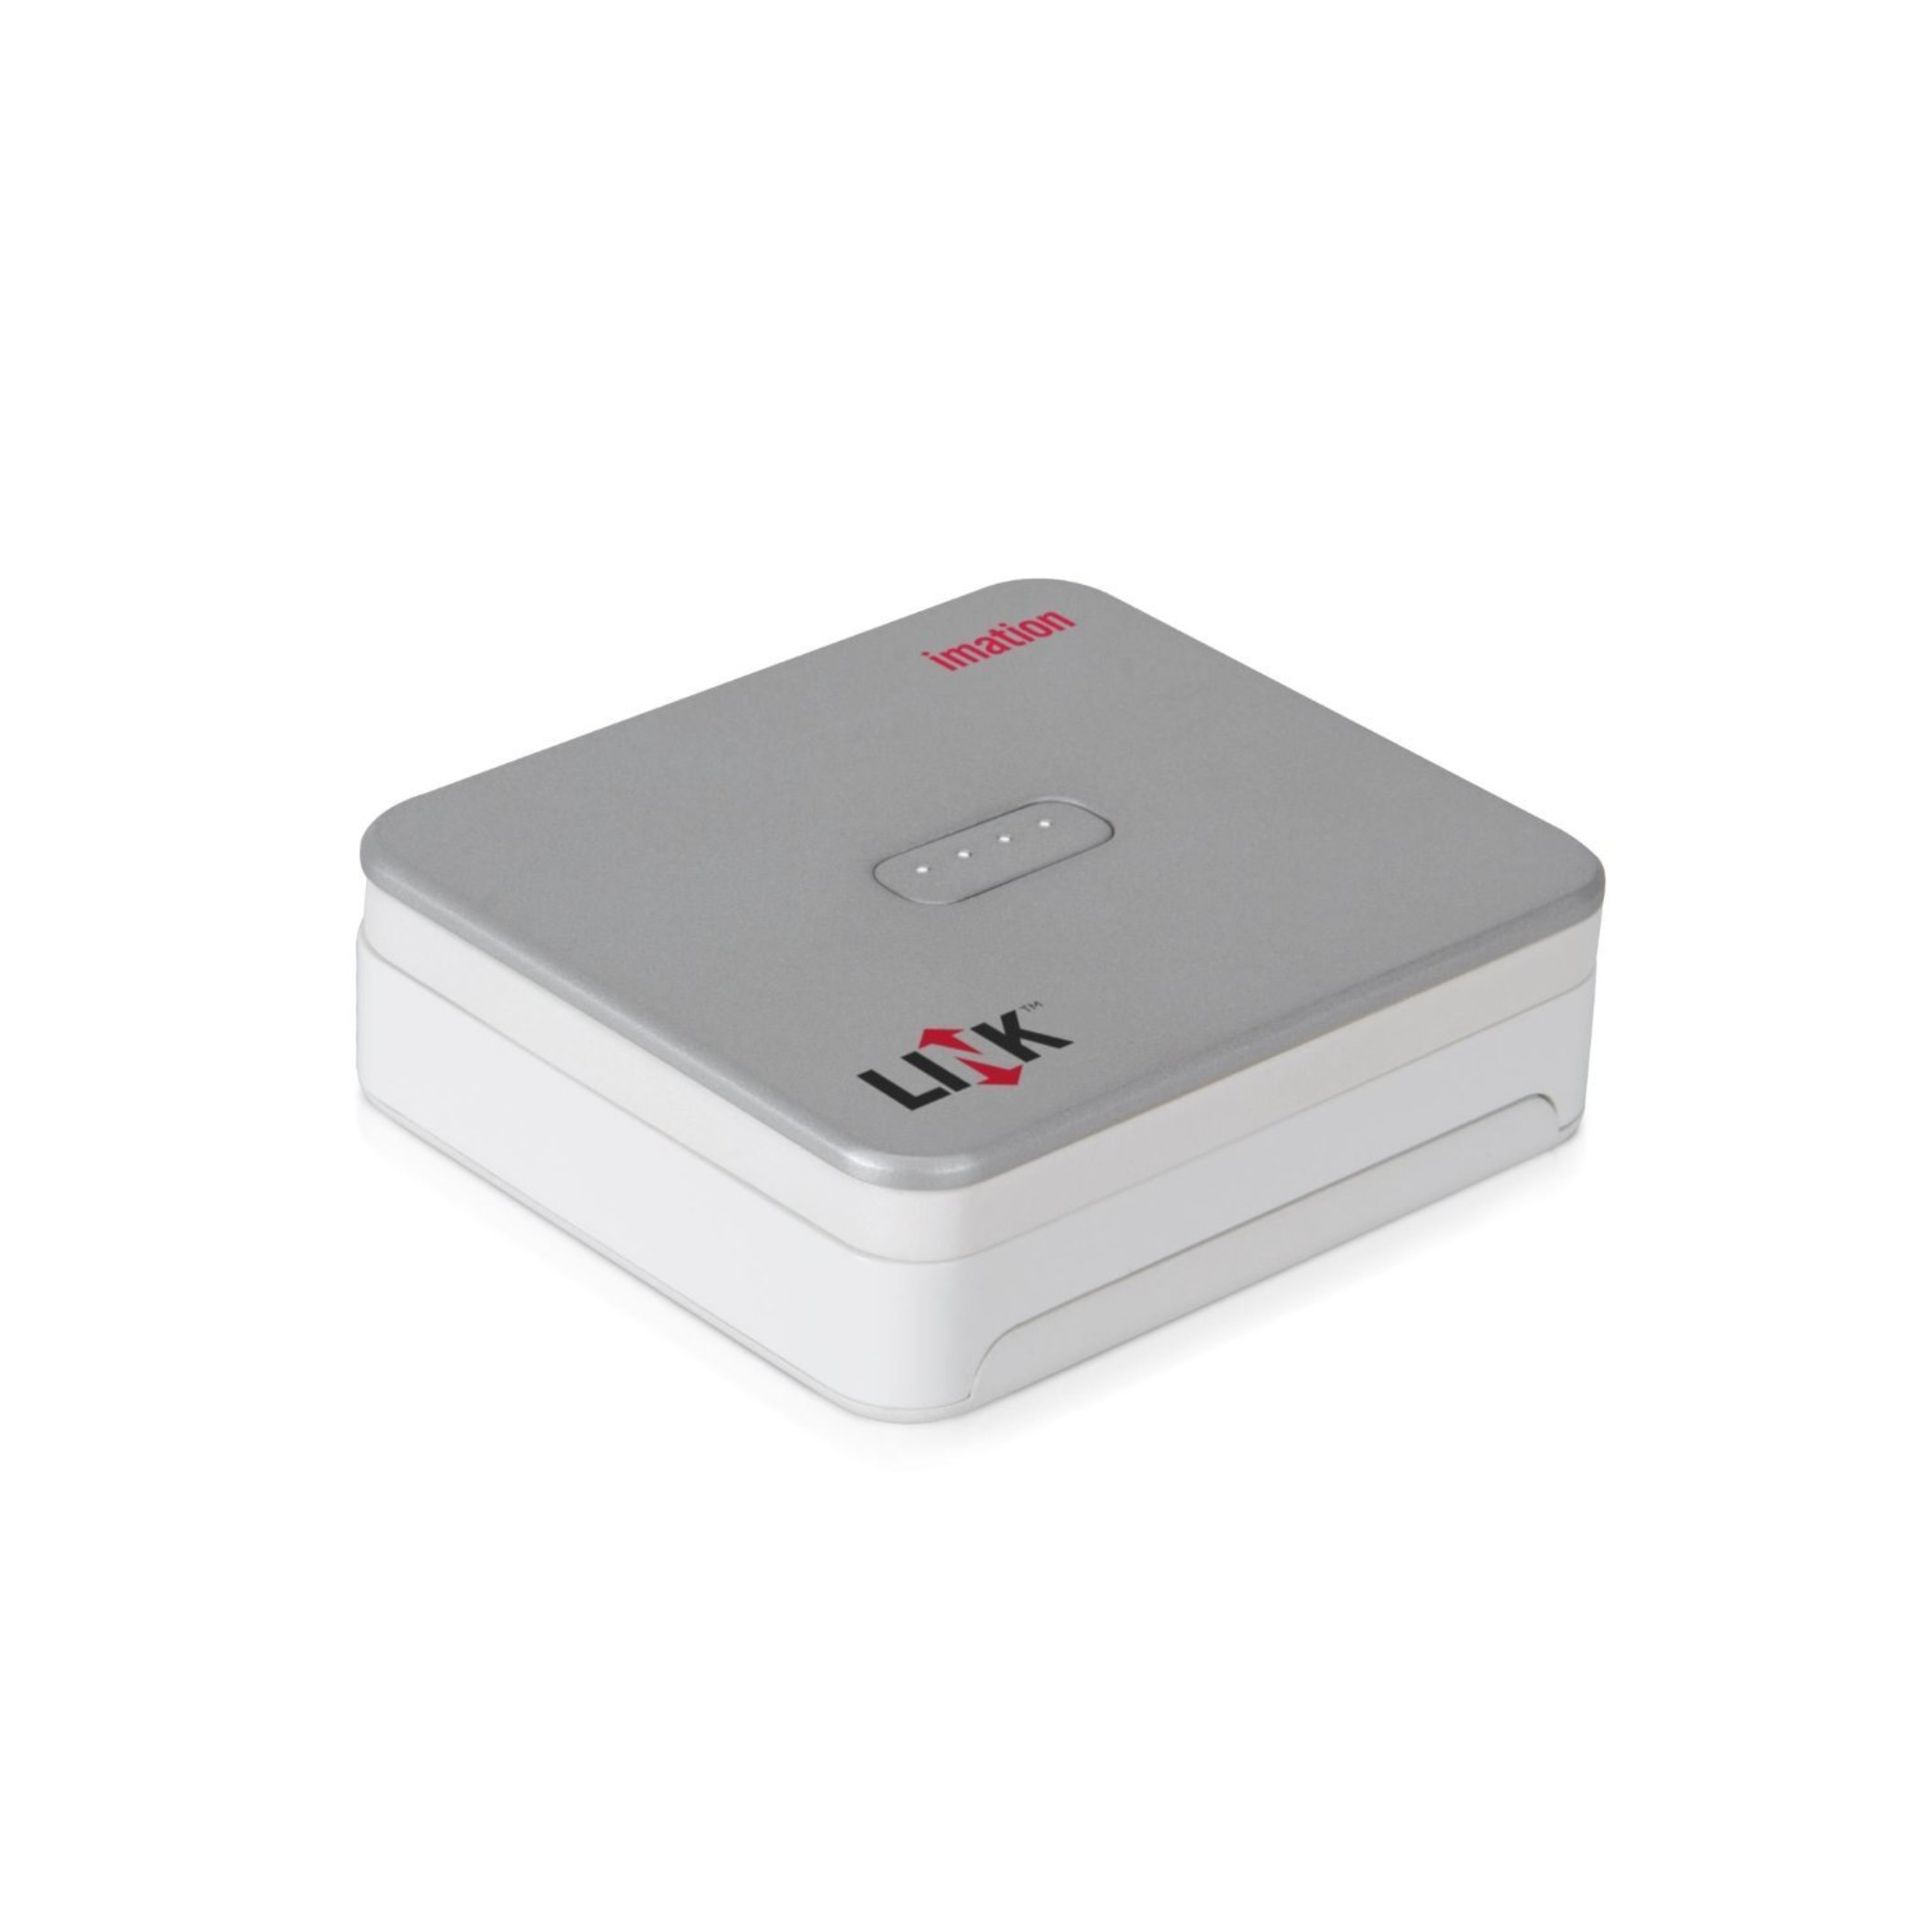 V Brand New Imation Link 32GB Power Drive & Data Storage For Mobile Devices - Charger Capacity